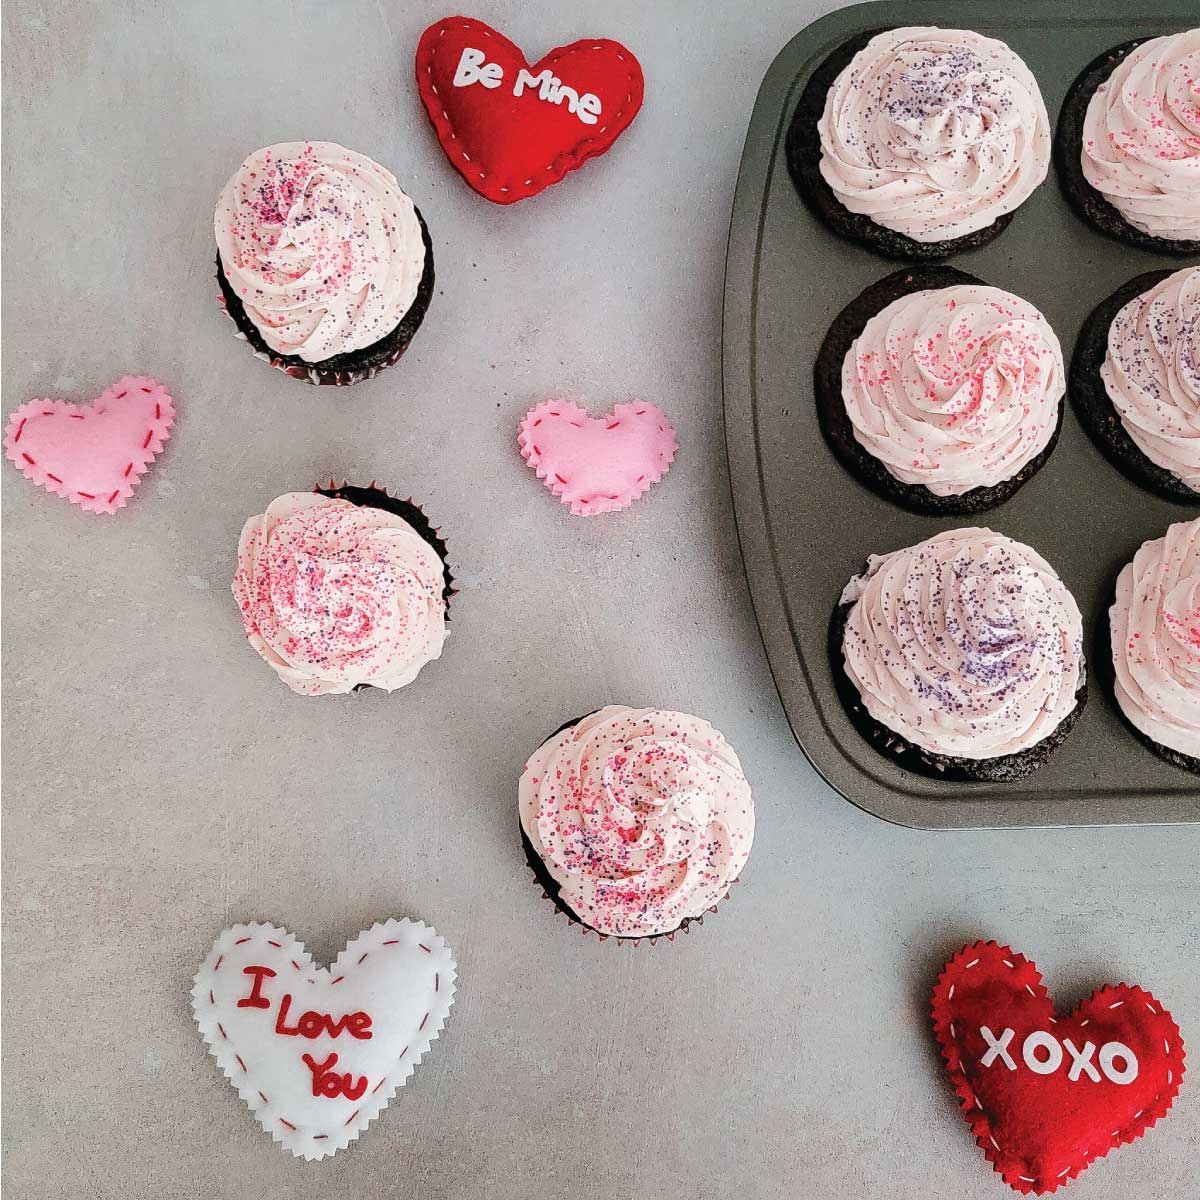 Cupcakes with icing swirled on top and decorative sugar sprinkled on top with felt hearts scattered around for Valentine's Day decorations.